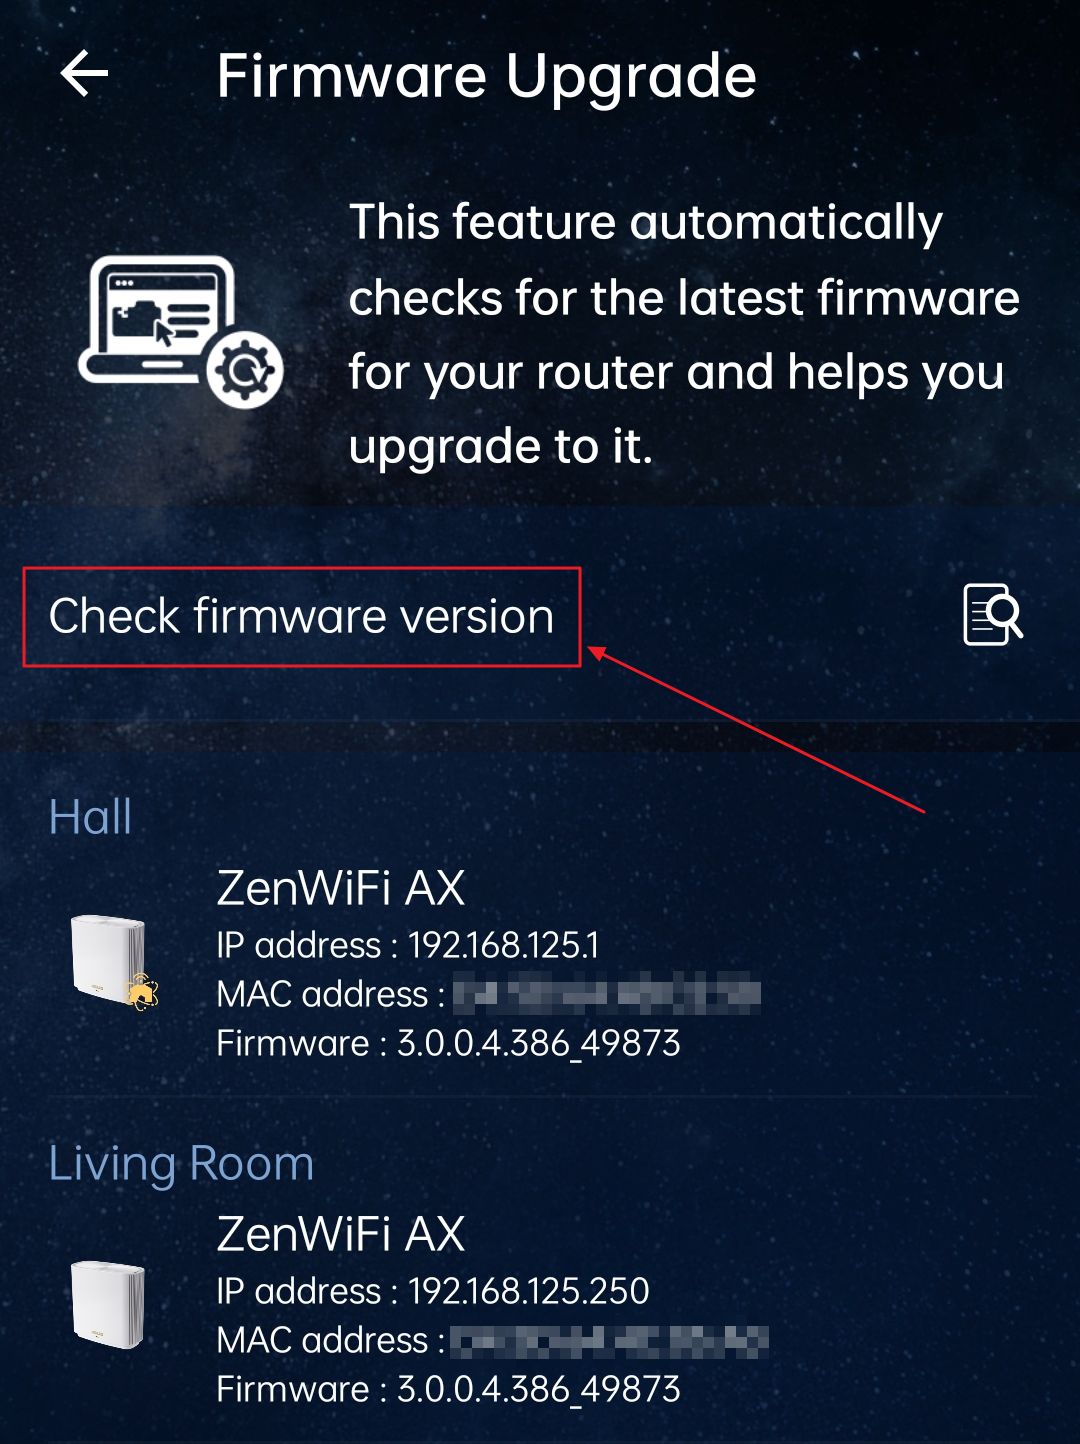 asus router mobile app check firmware versionjpg